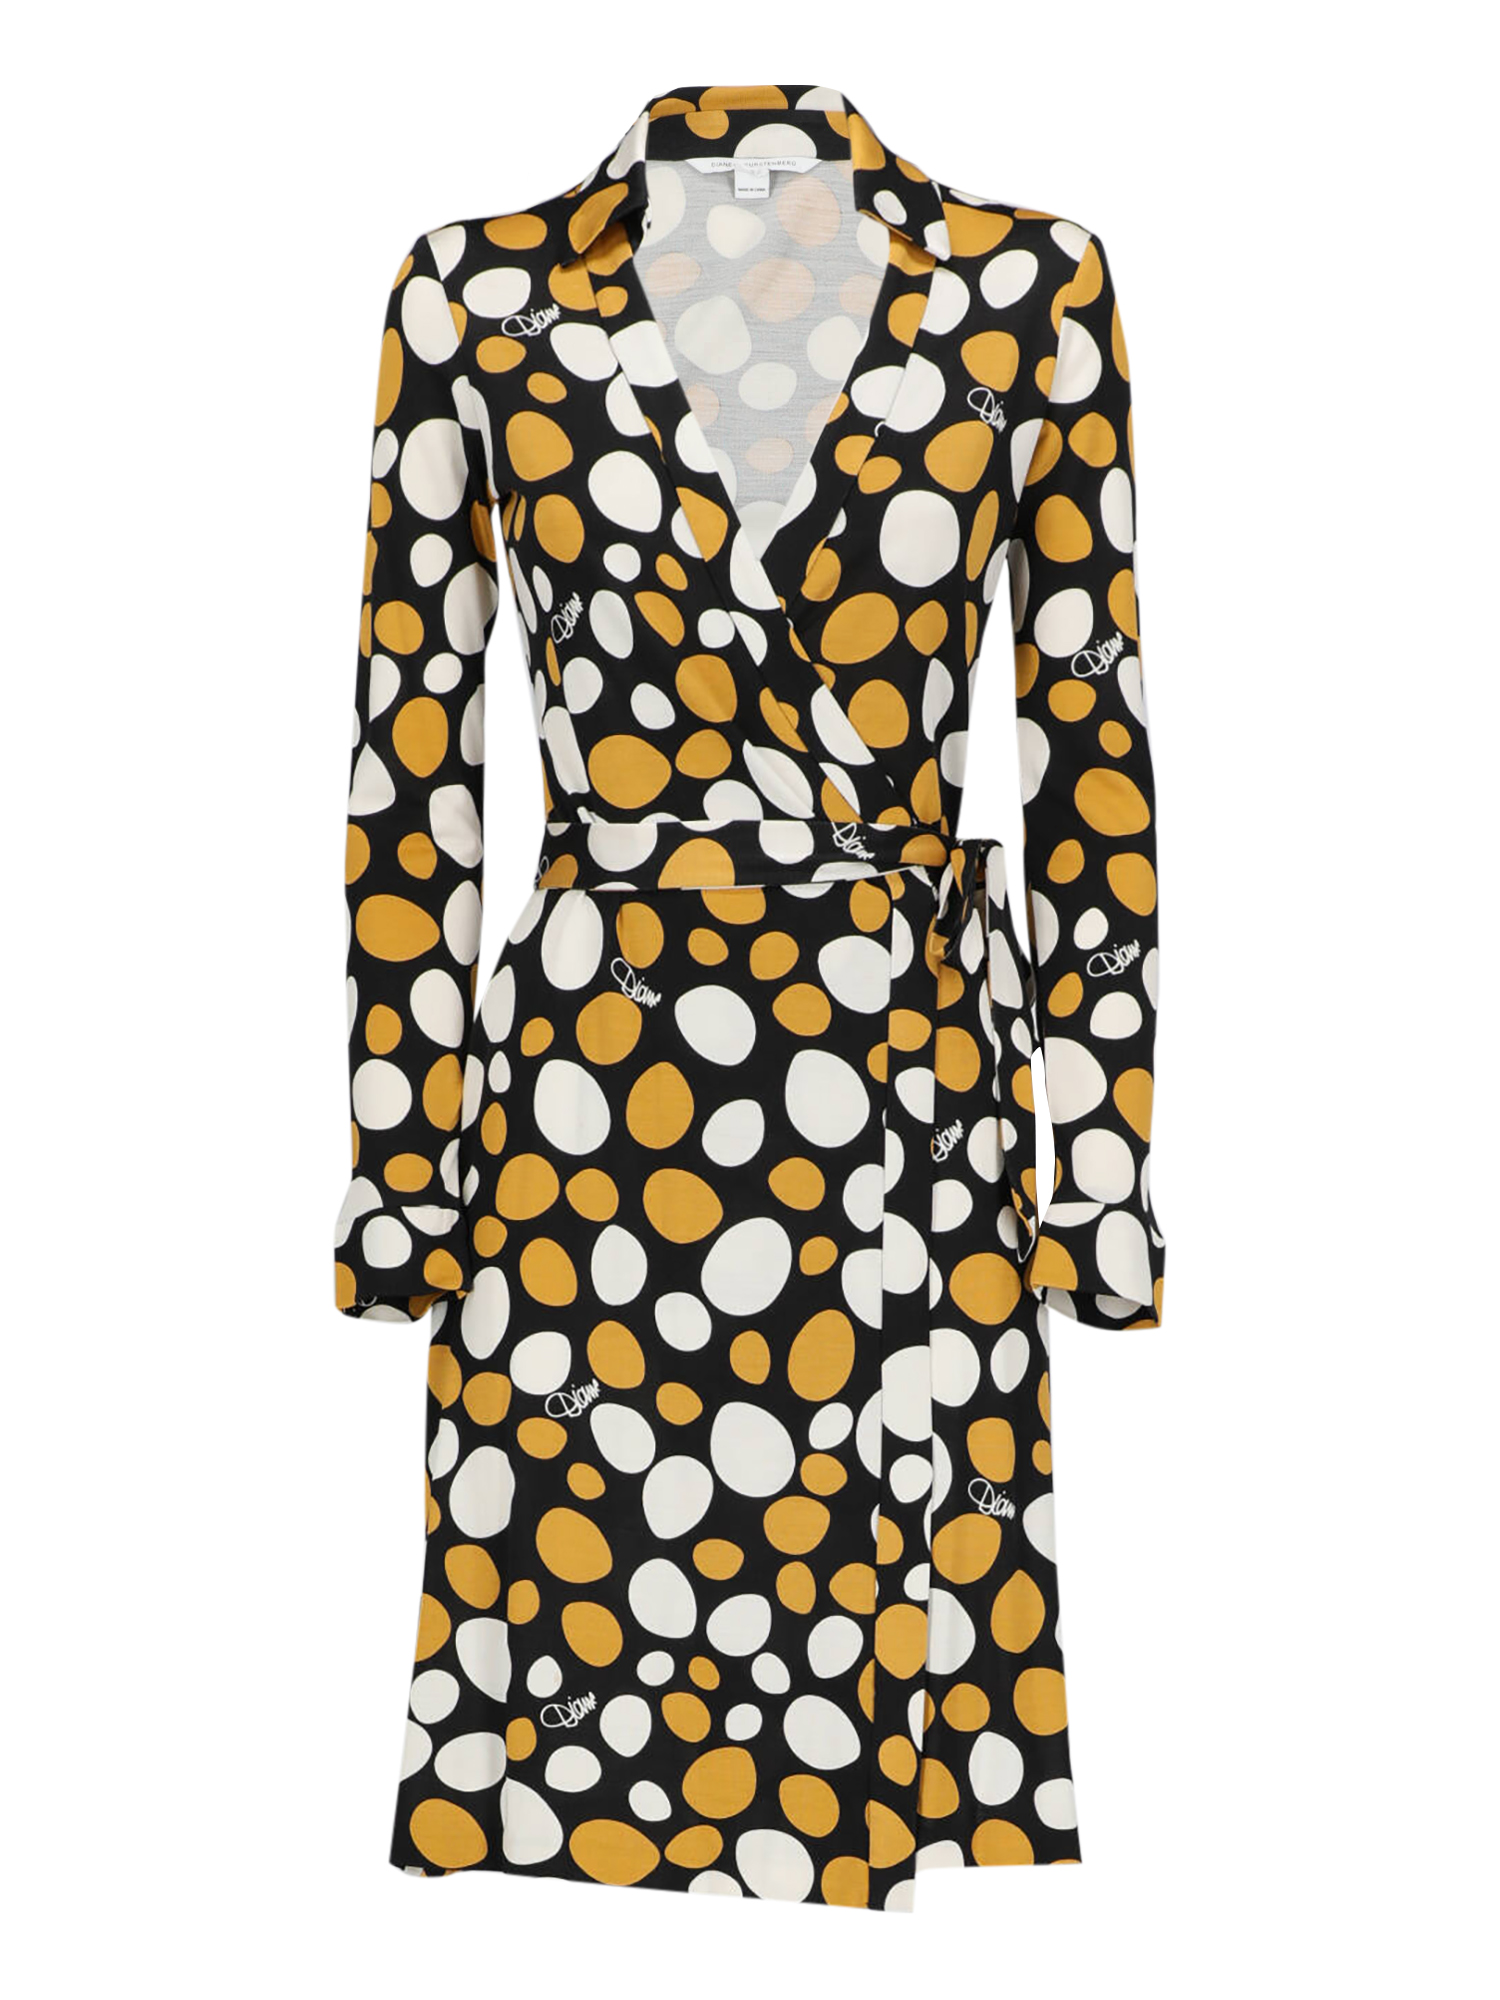 Condition: Very Good, Polka Dot Silk, Color: Black, White, Yellow - S - US 4 -